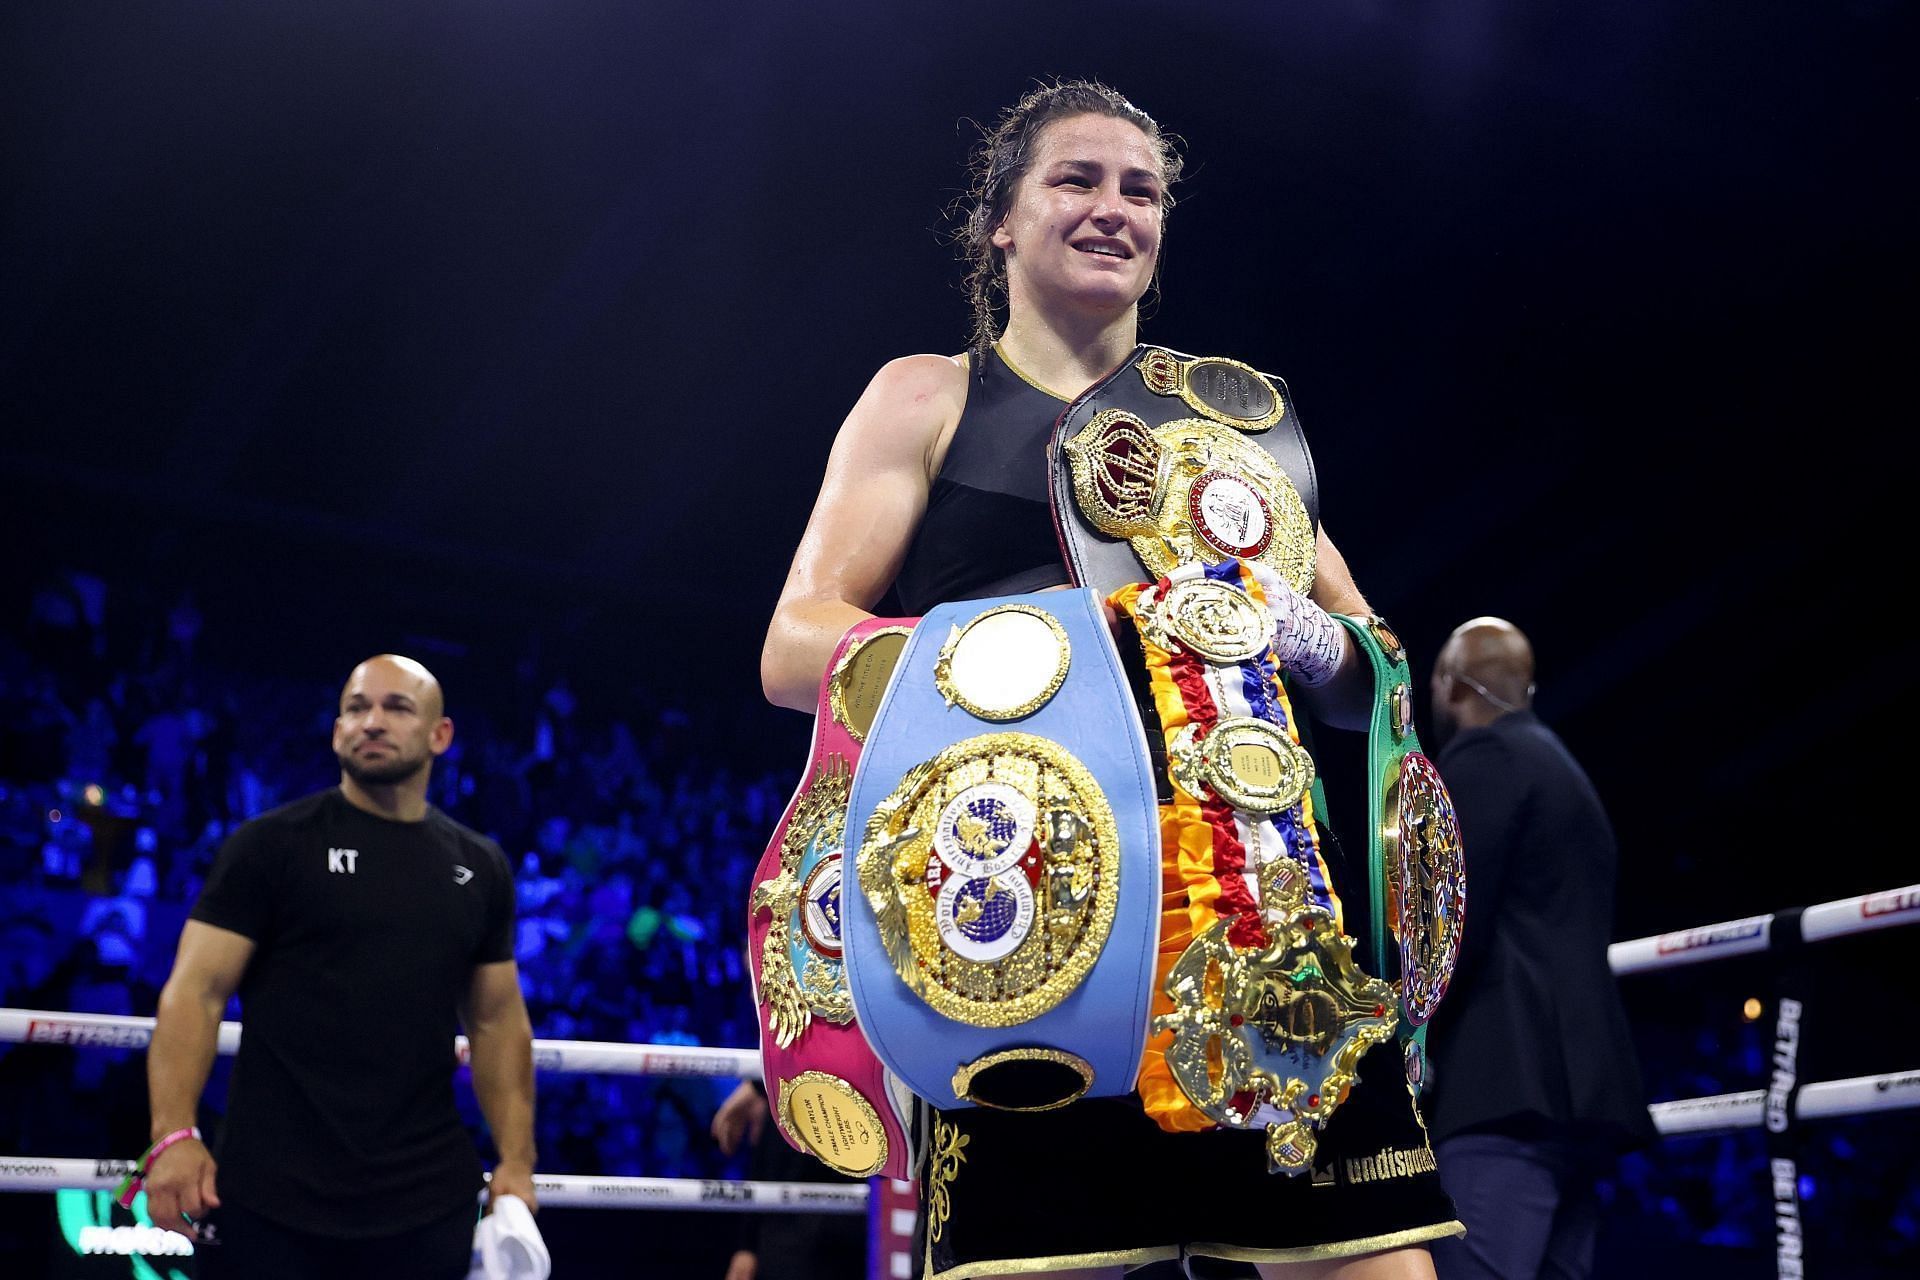 Katie Taylor Next Fight Opponent, Date, Venue and Tickets